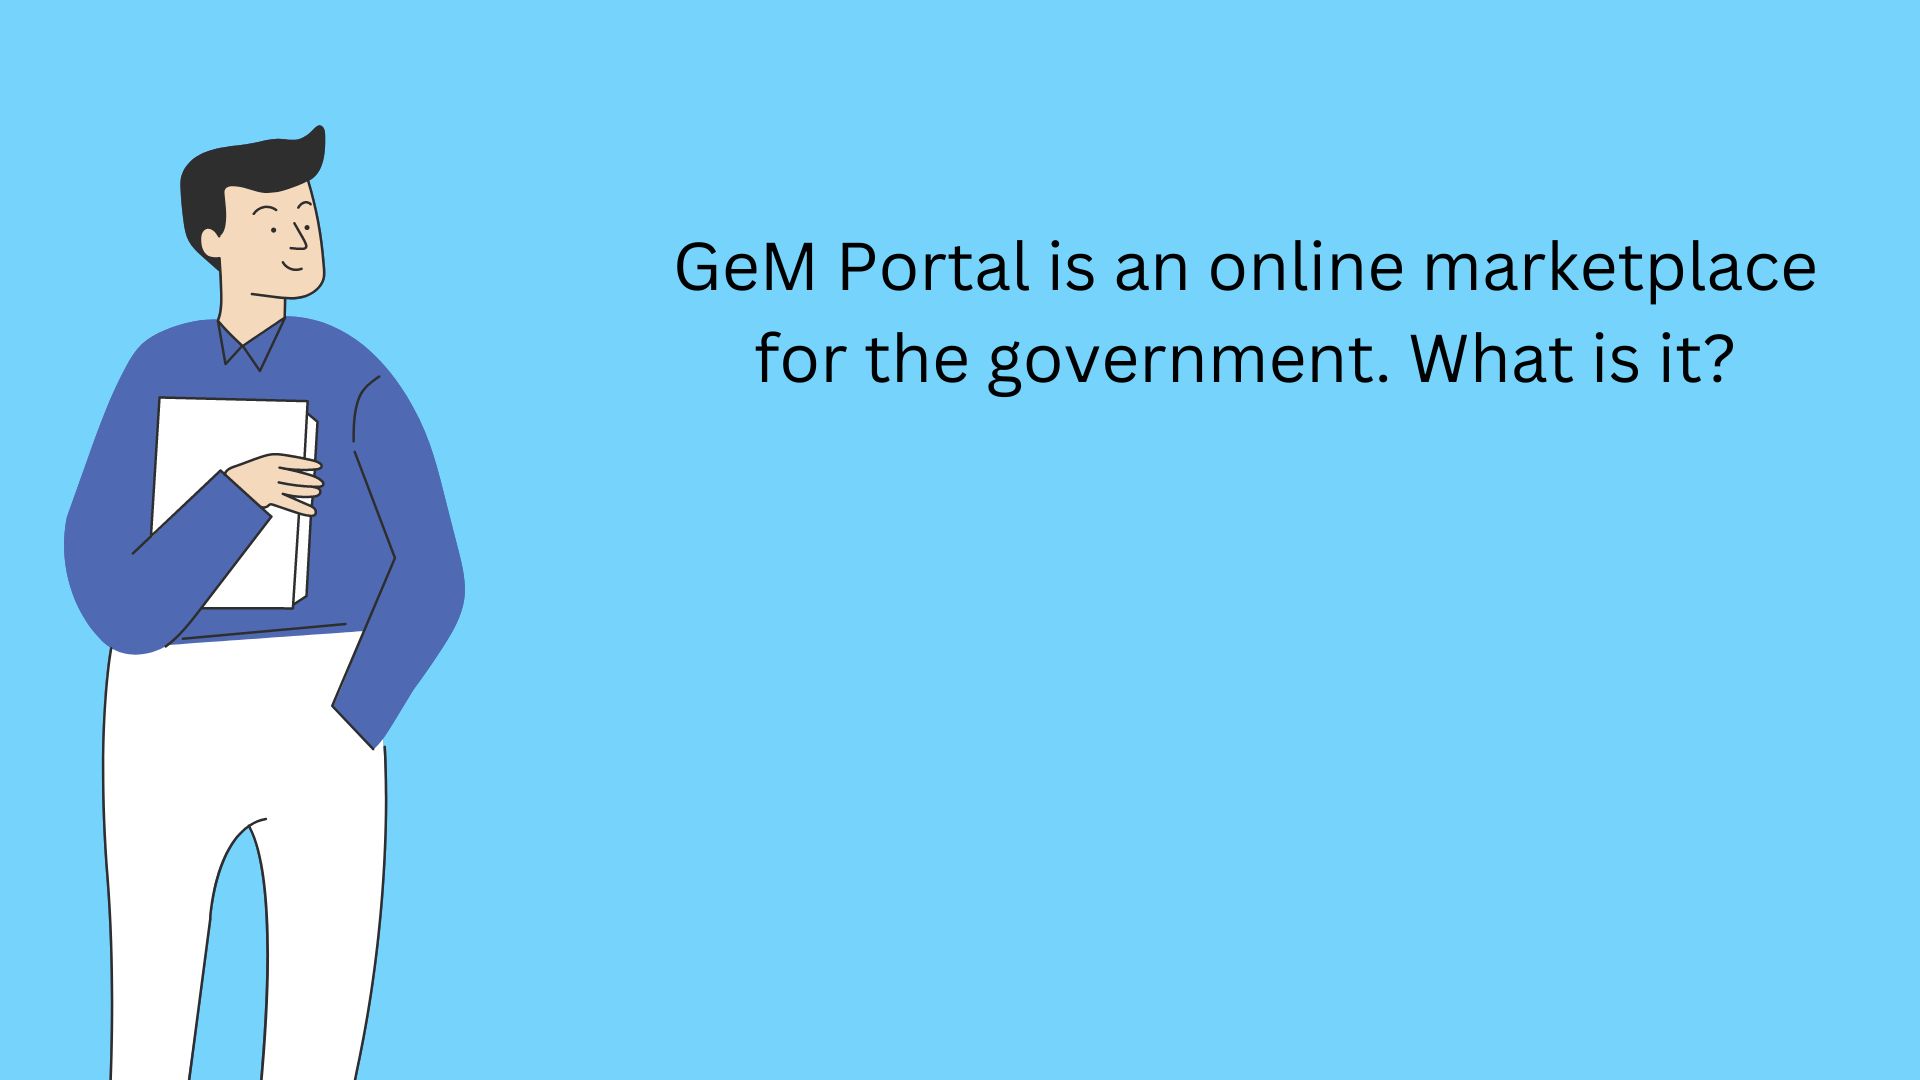 GeM Portal is an online marketplace for the government. What is it